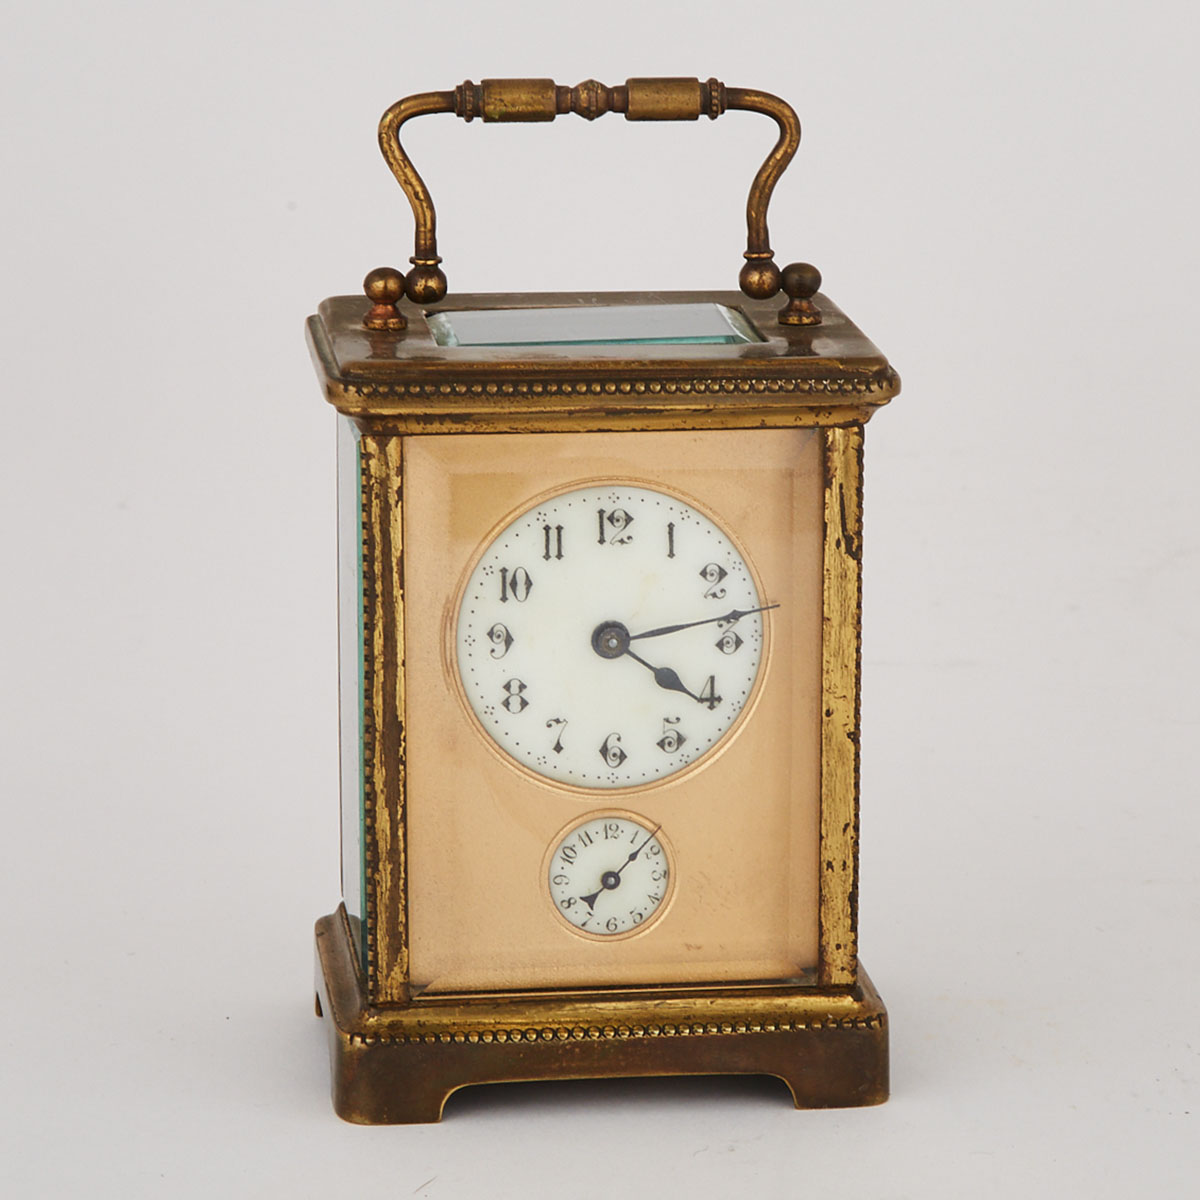 French Carriage Clock with Alarm, late 19th century